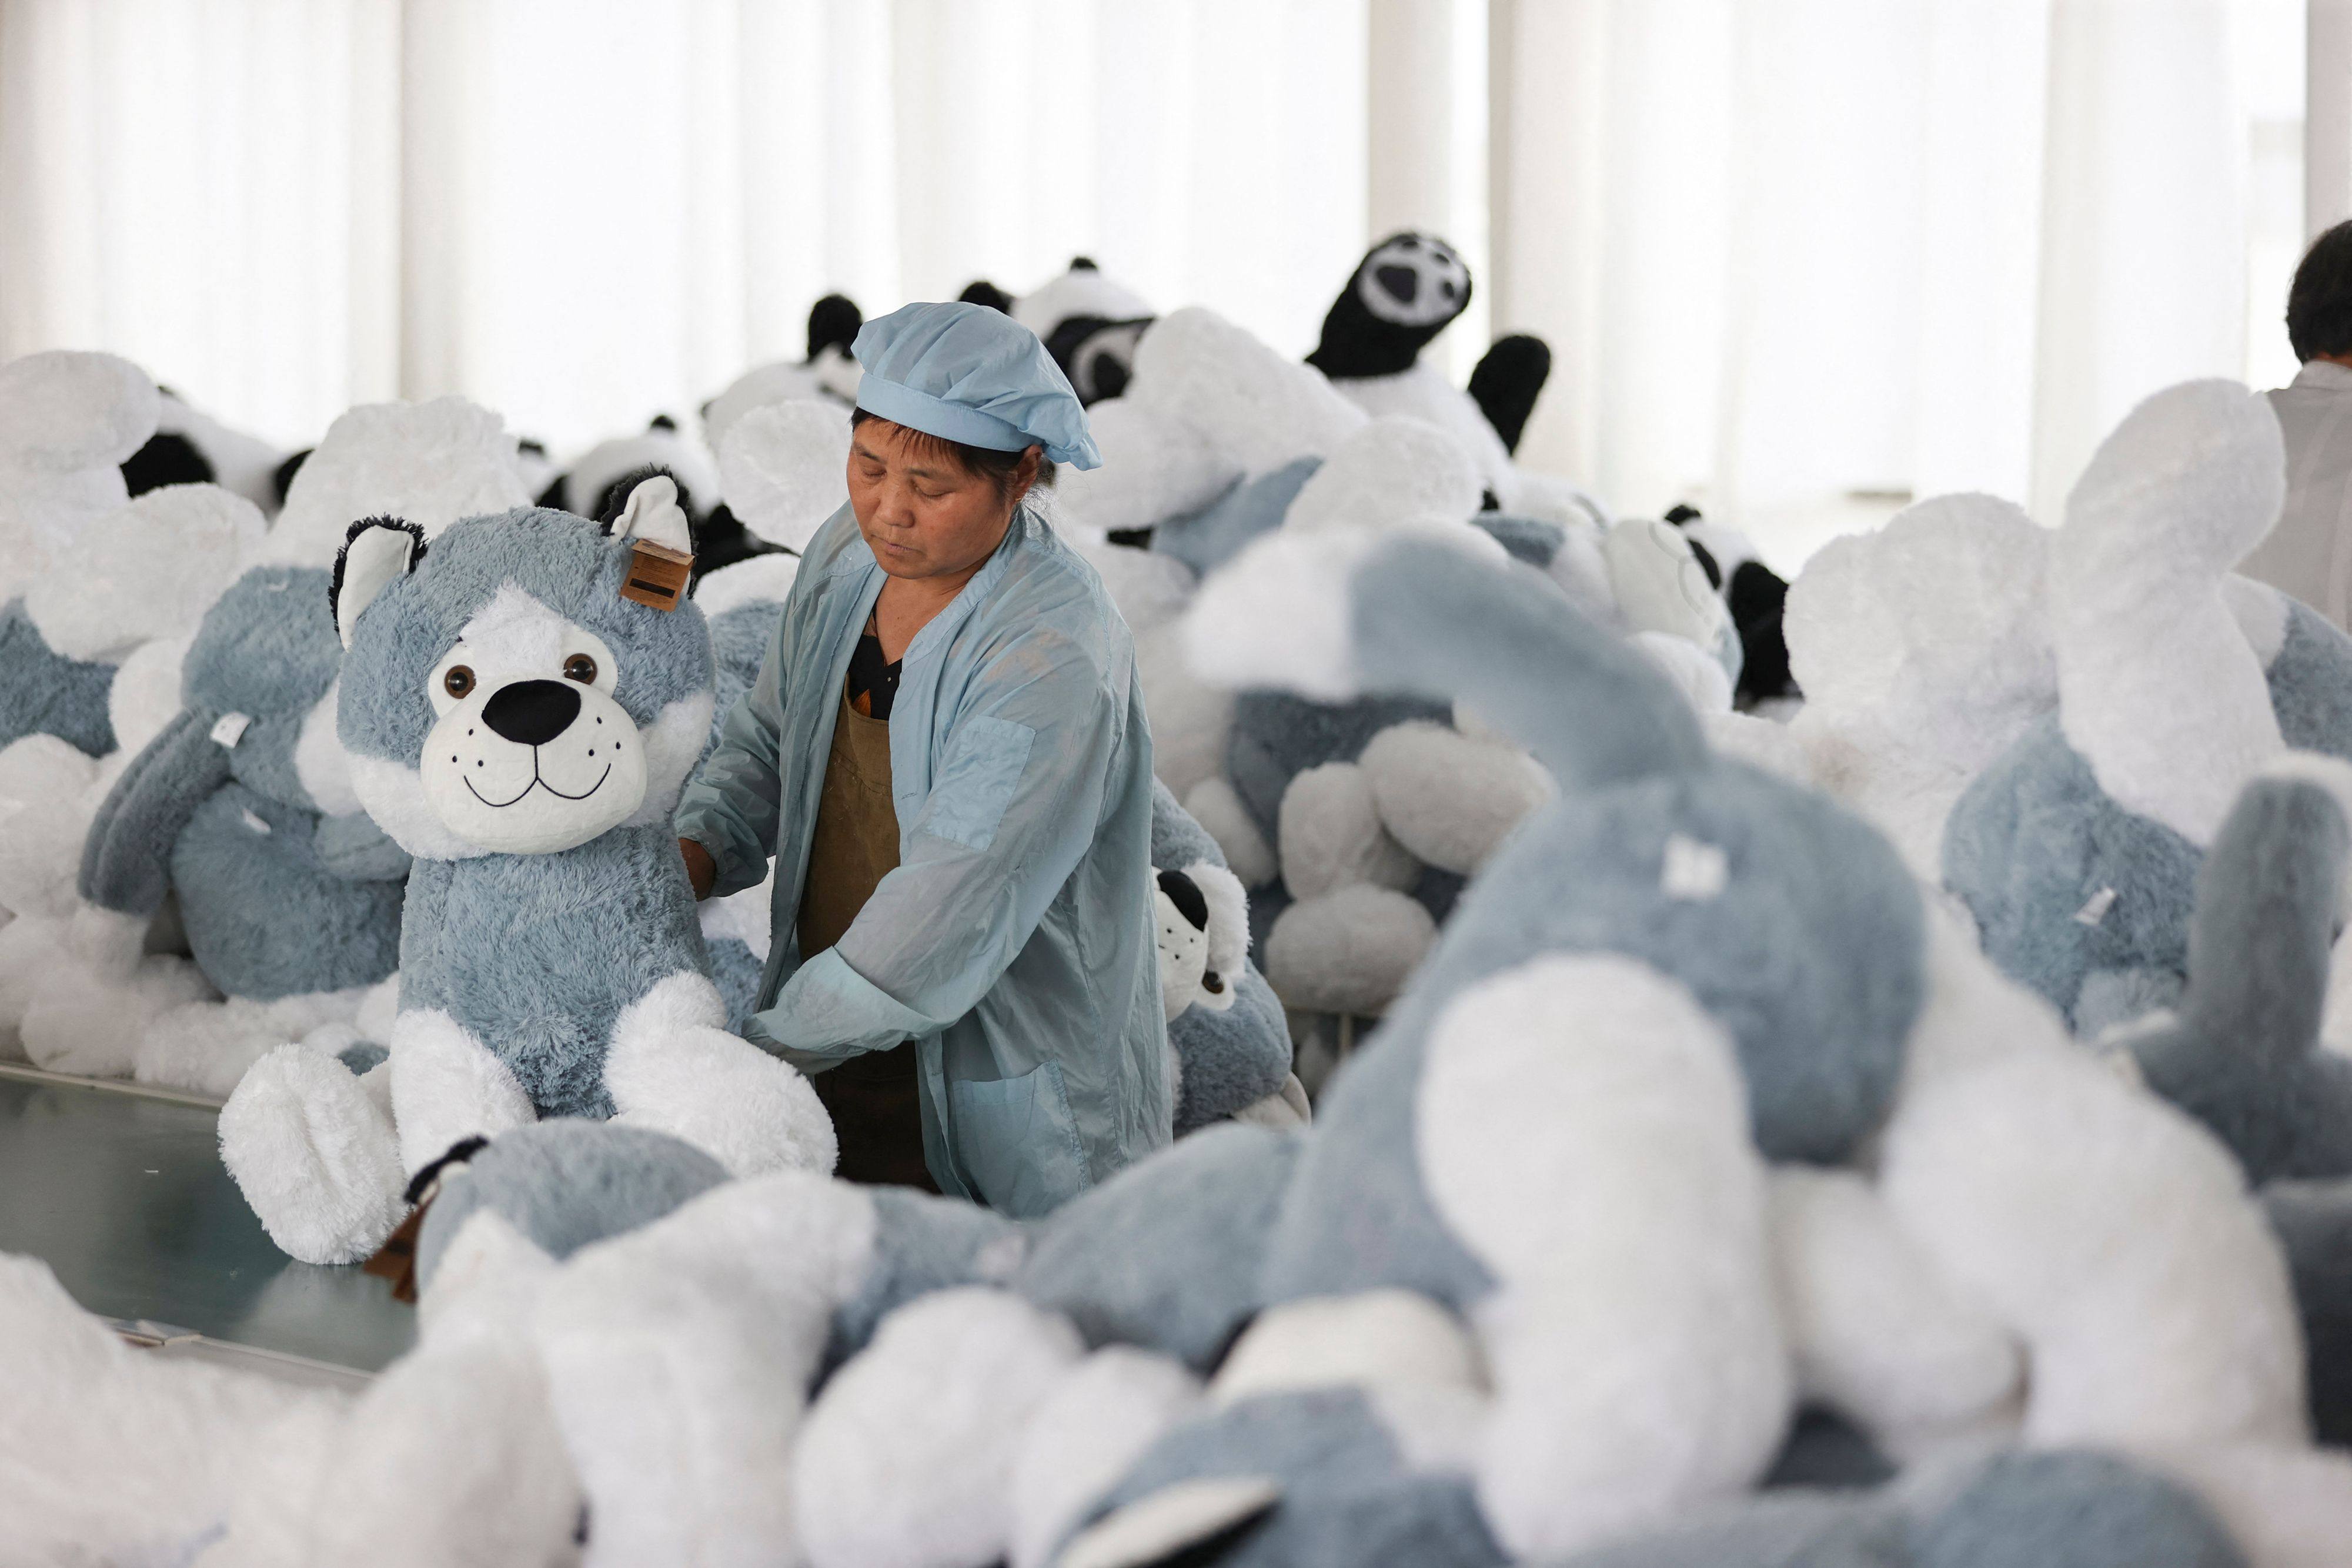 A worker produces stuffed toys for export at a factory in Lianyungang, in China’s eastern Jiangsu province, on July 7. Photo: AFP